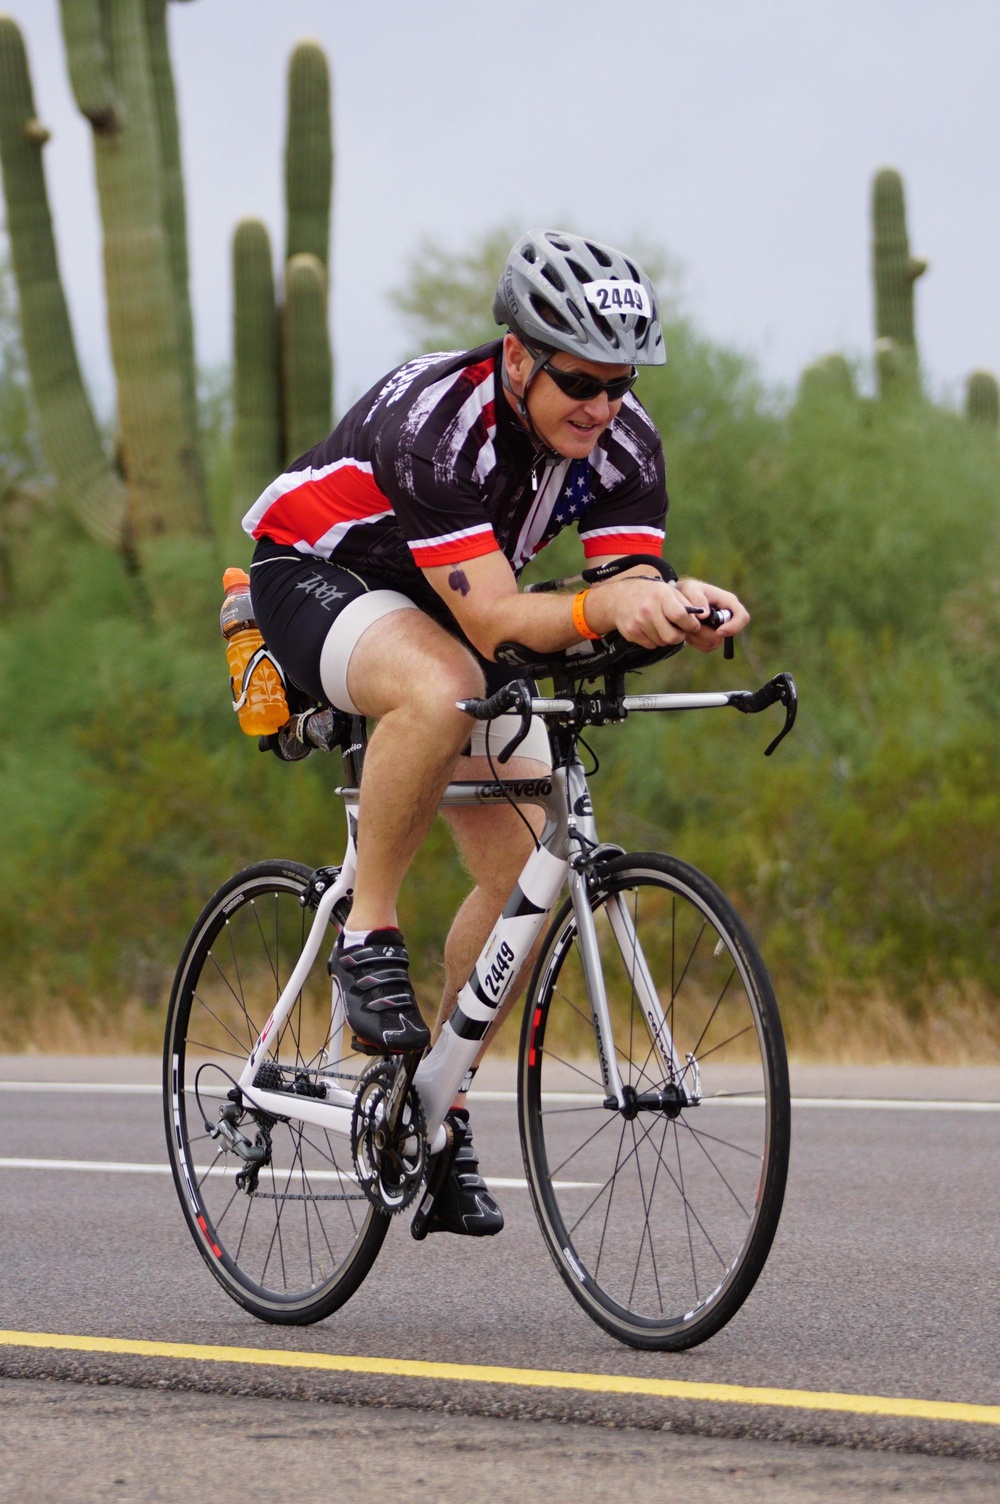 1st Sgt. Mitter rides during the cycling portion of the Ironman